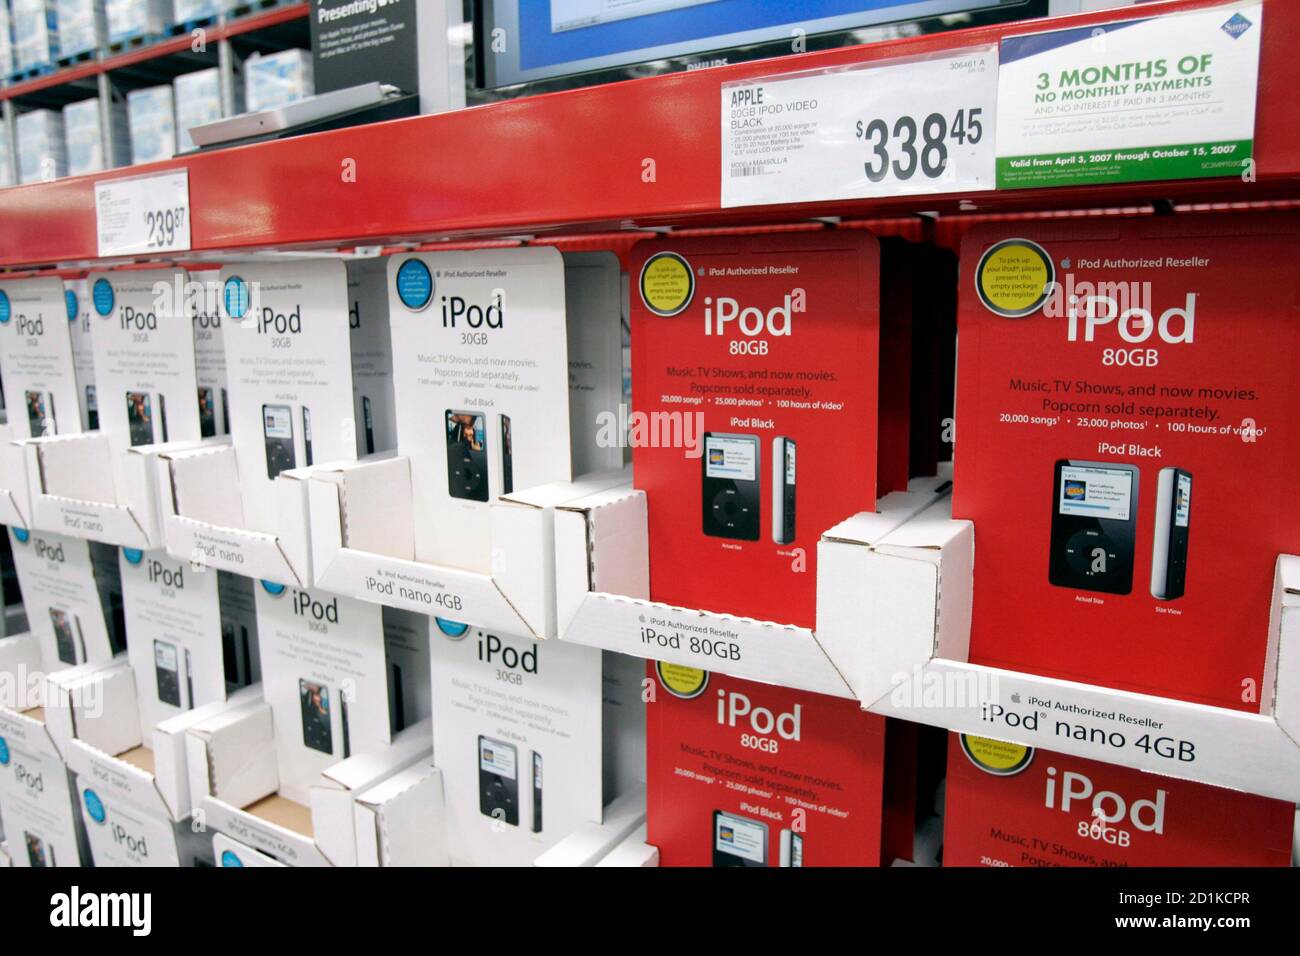 iPods are seen for sale in Sam's Club during a media tour of the Sam's Club  store in Bentonville, Arkansas May 31, 2007. Sam's Club is a subsidiary of  Wal-Mart. Wal-Mart will